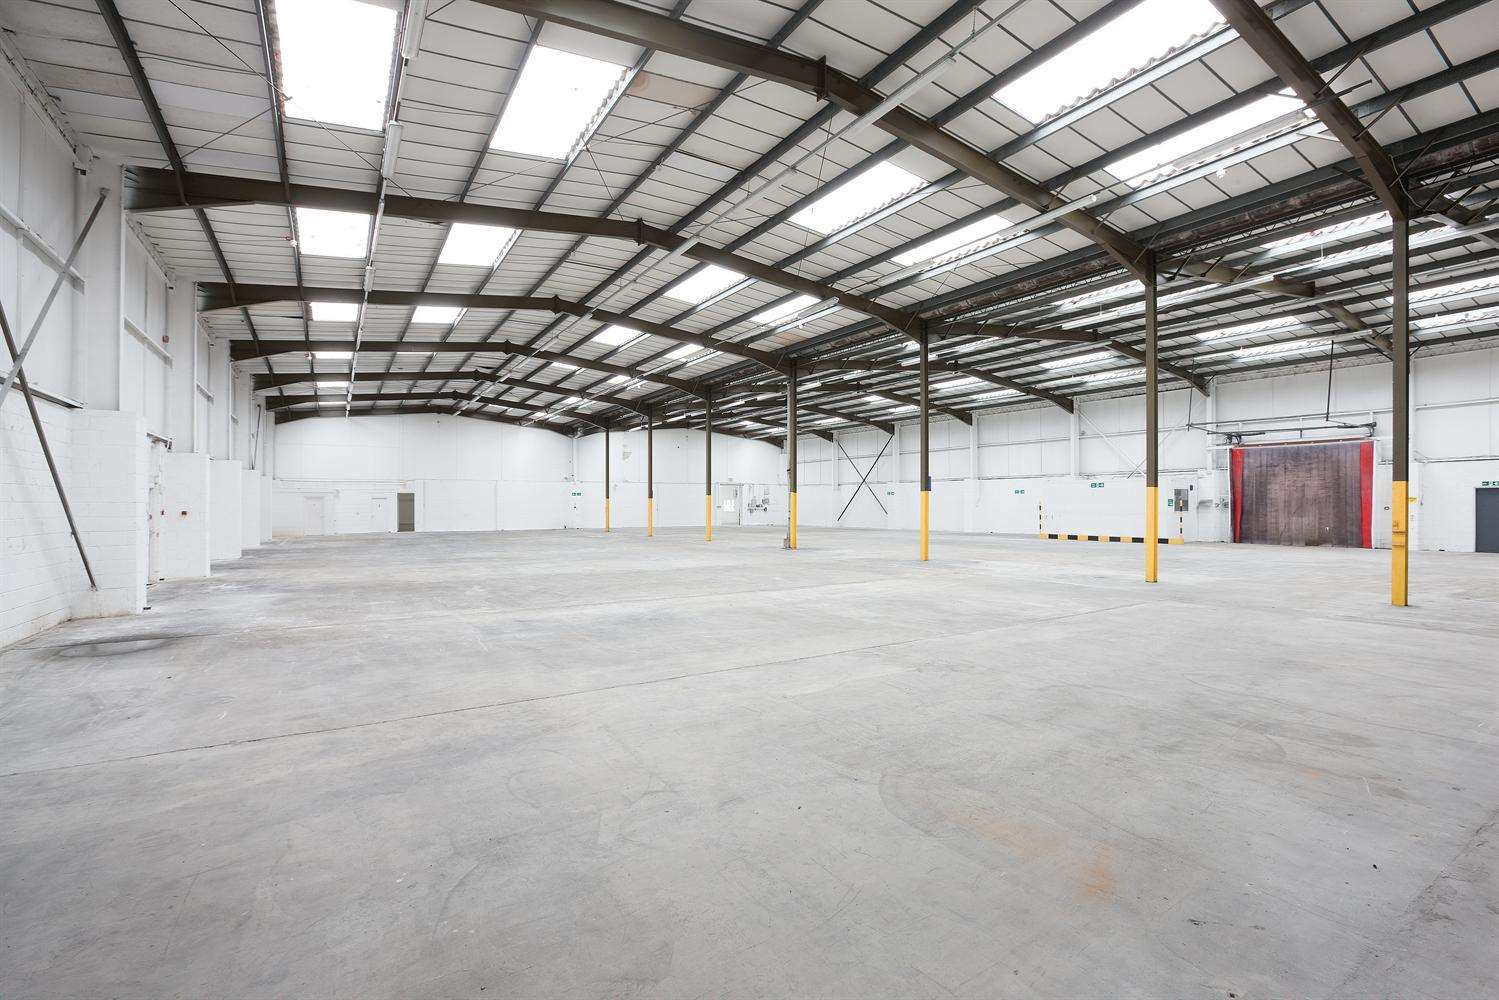 MTS bought a warehouse unit in Ashford for £1.2m